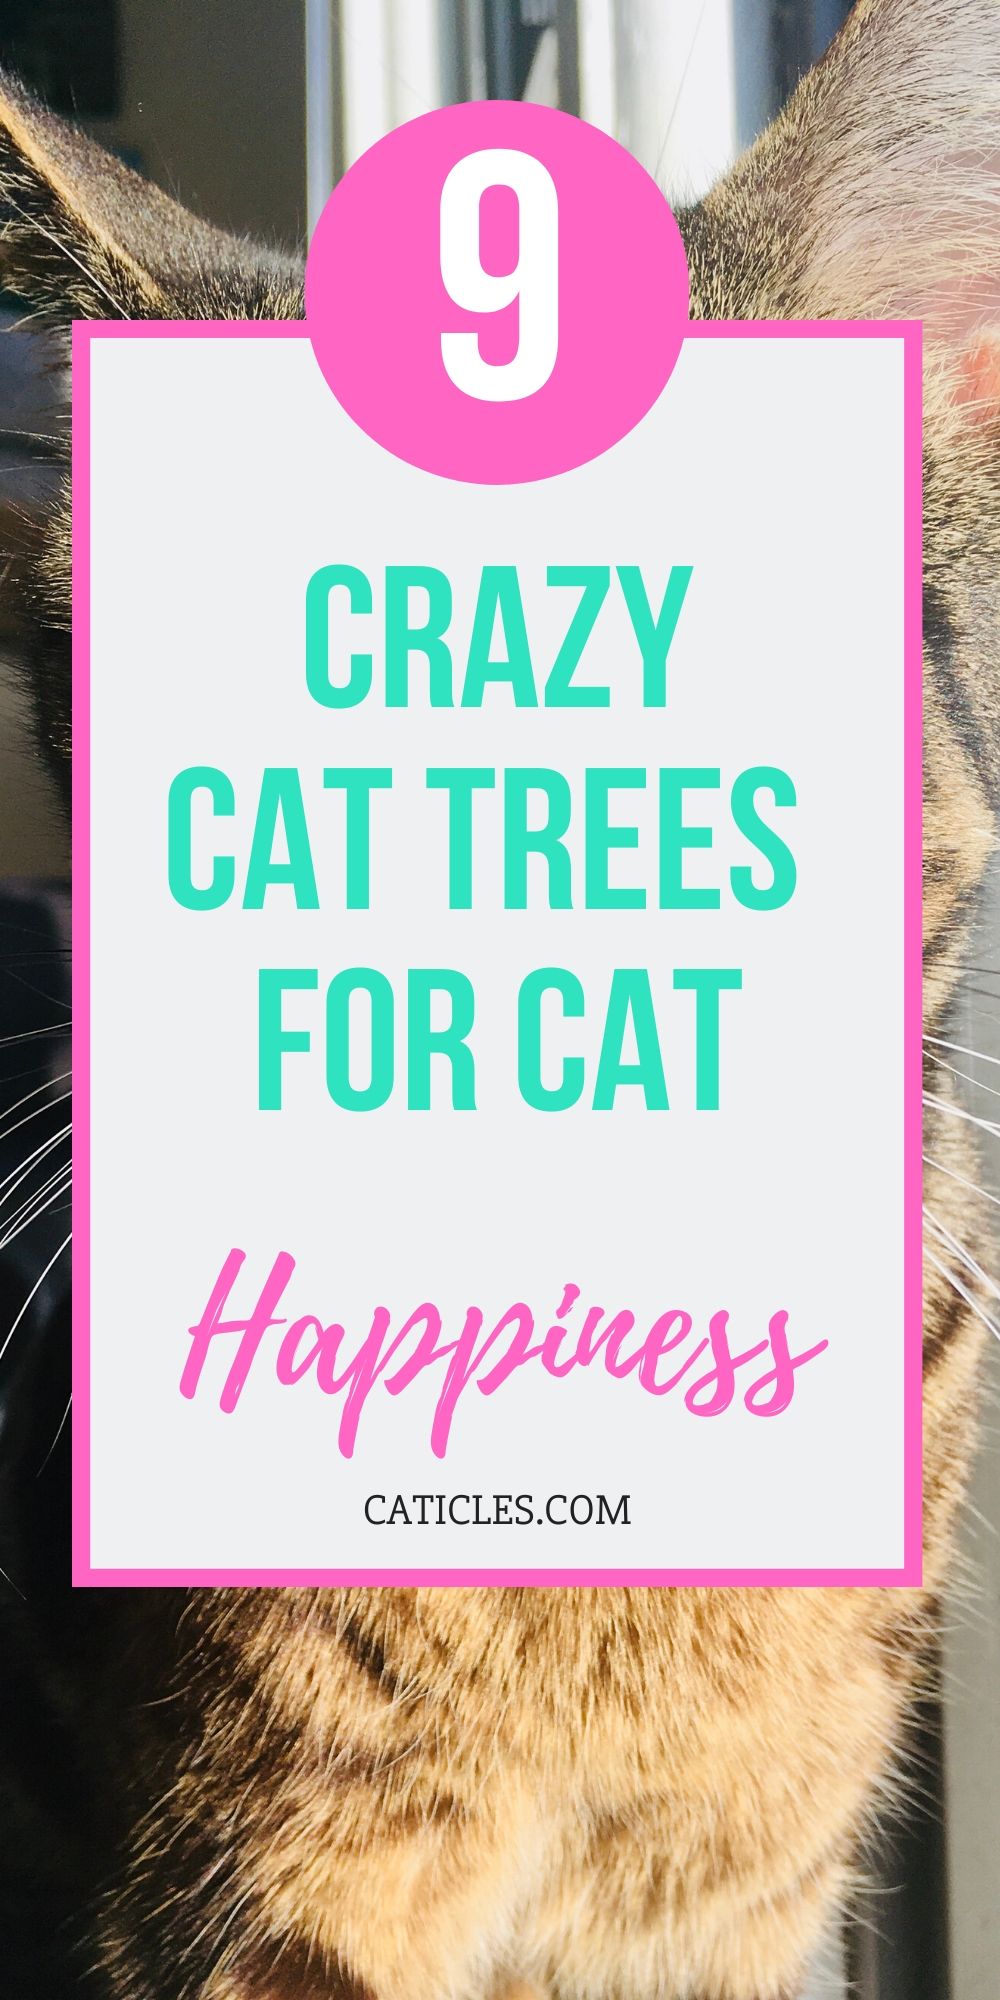 pin image 9 crazy cat trees for cat happiness